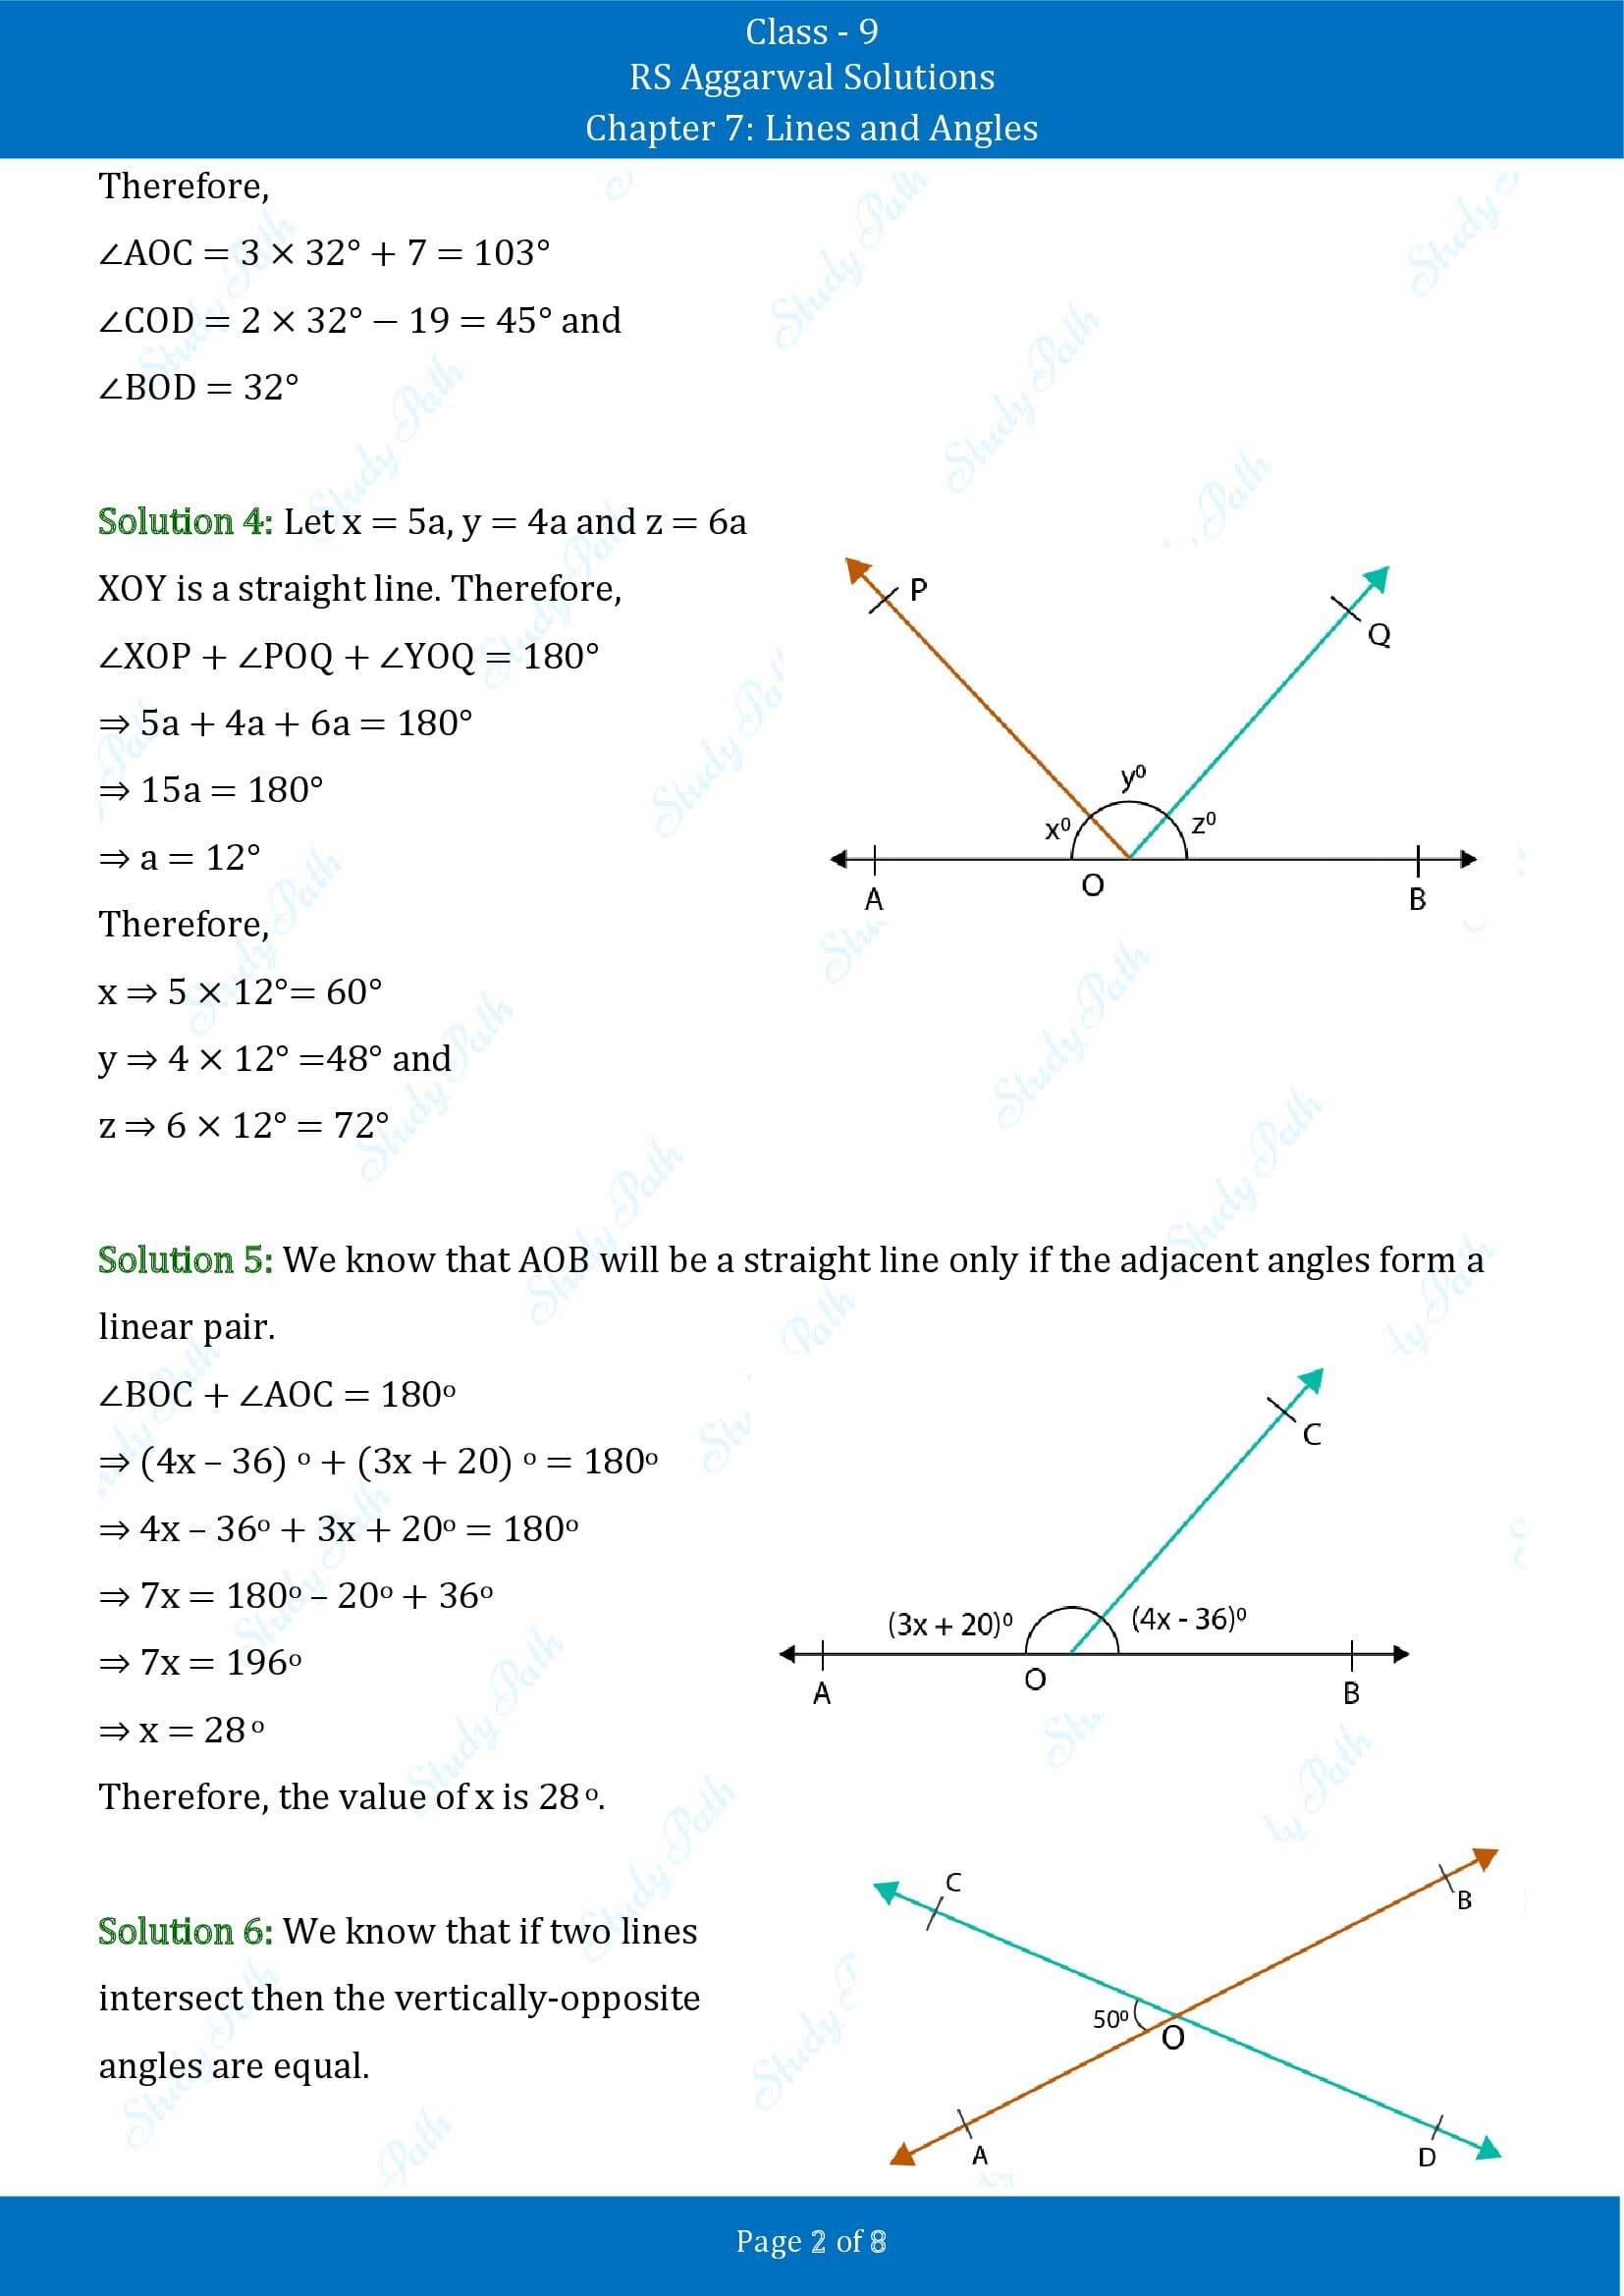 RS Aggarwal Solutions Class 9 Chapter 7 Lines and Angles Exercise 7B 00002